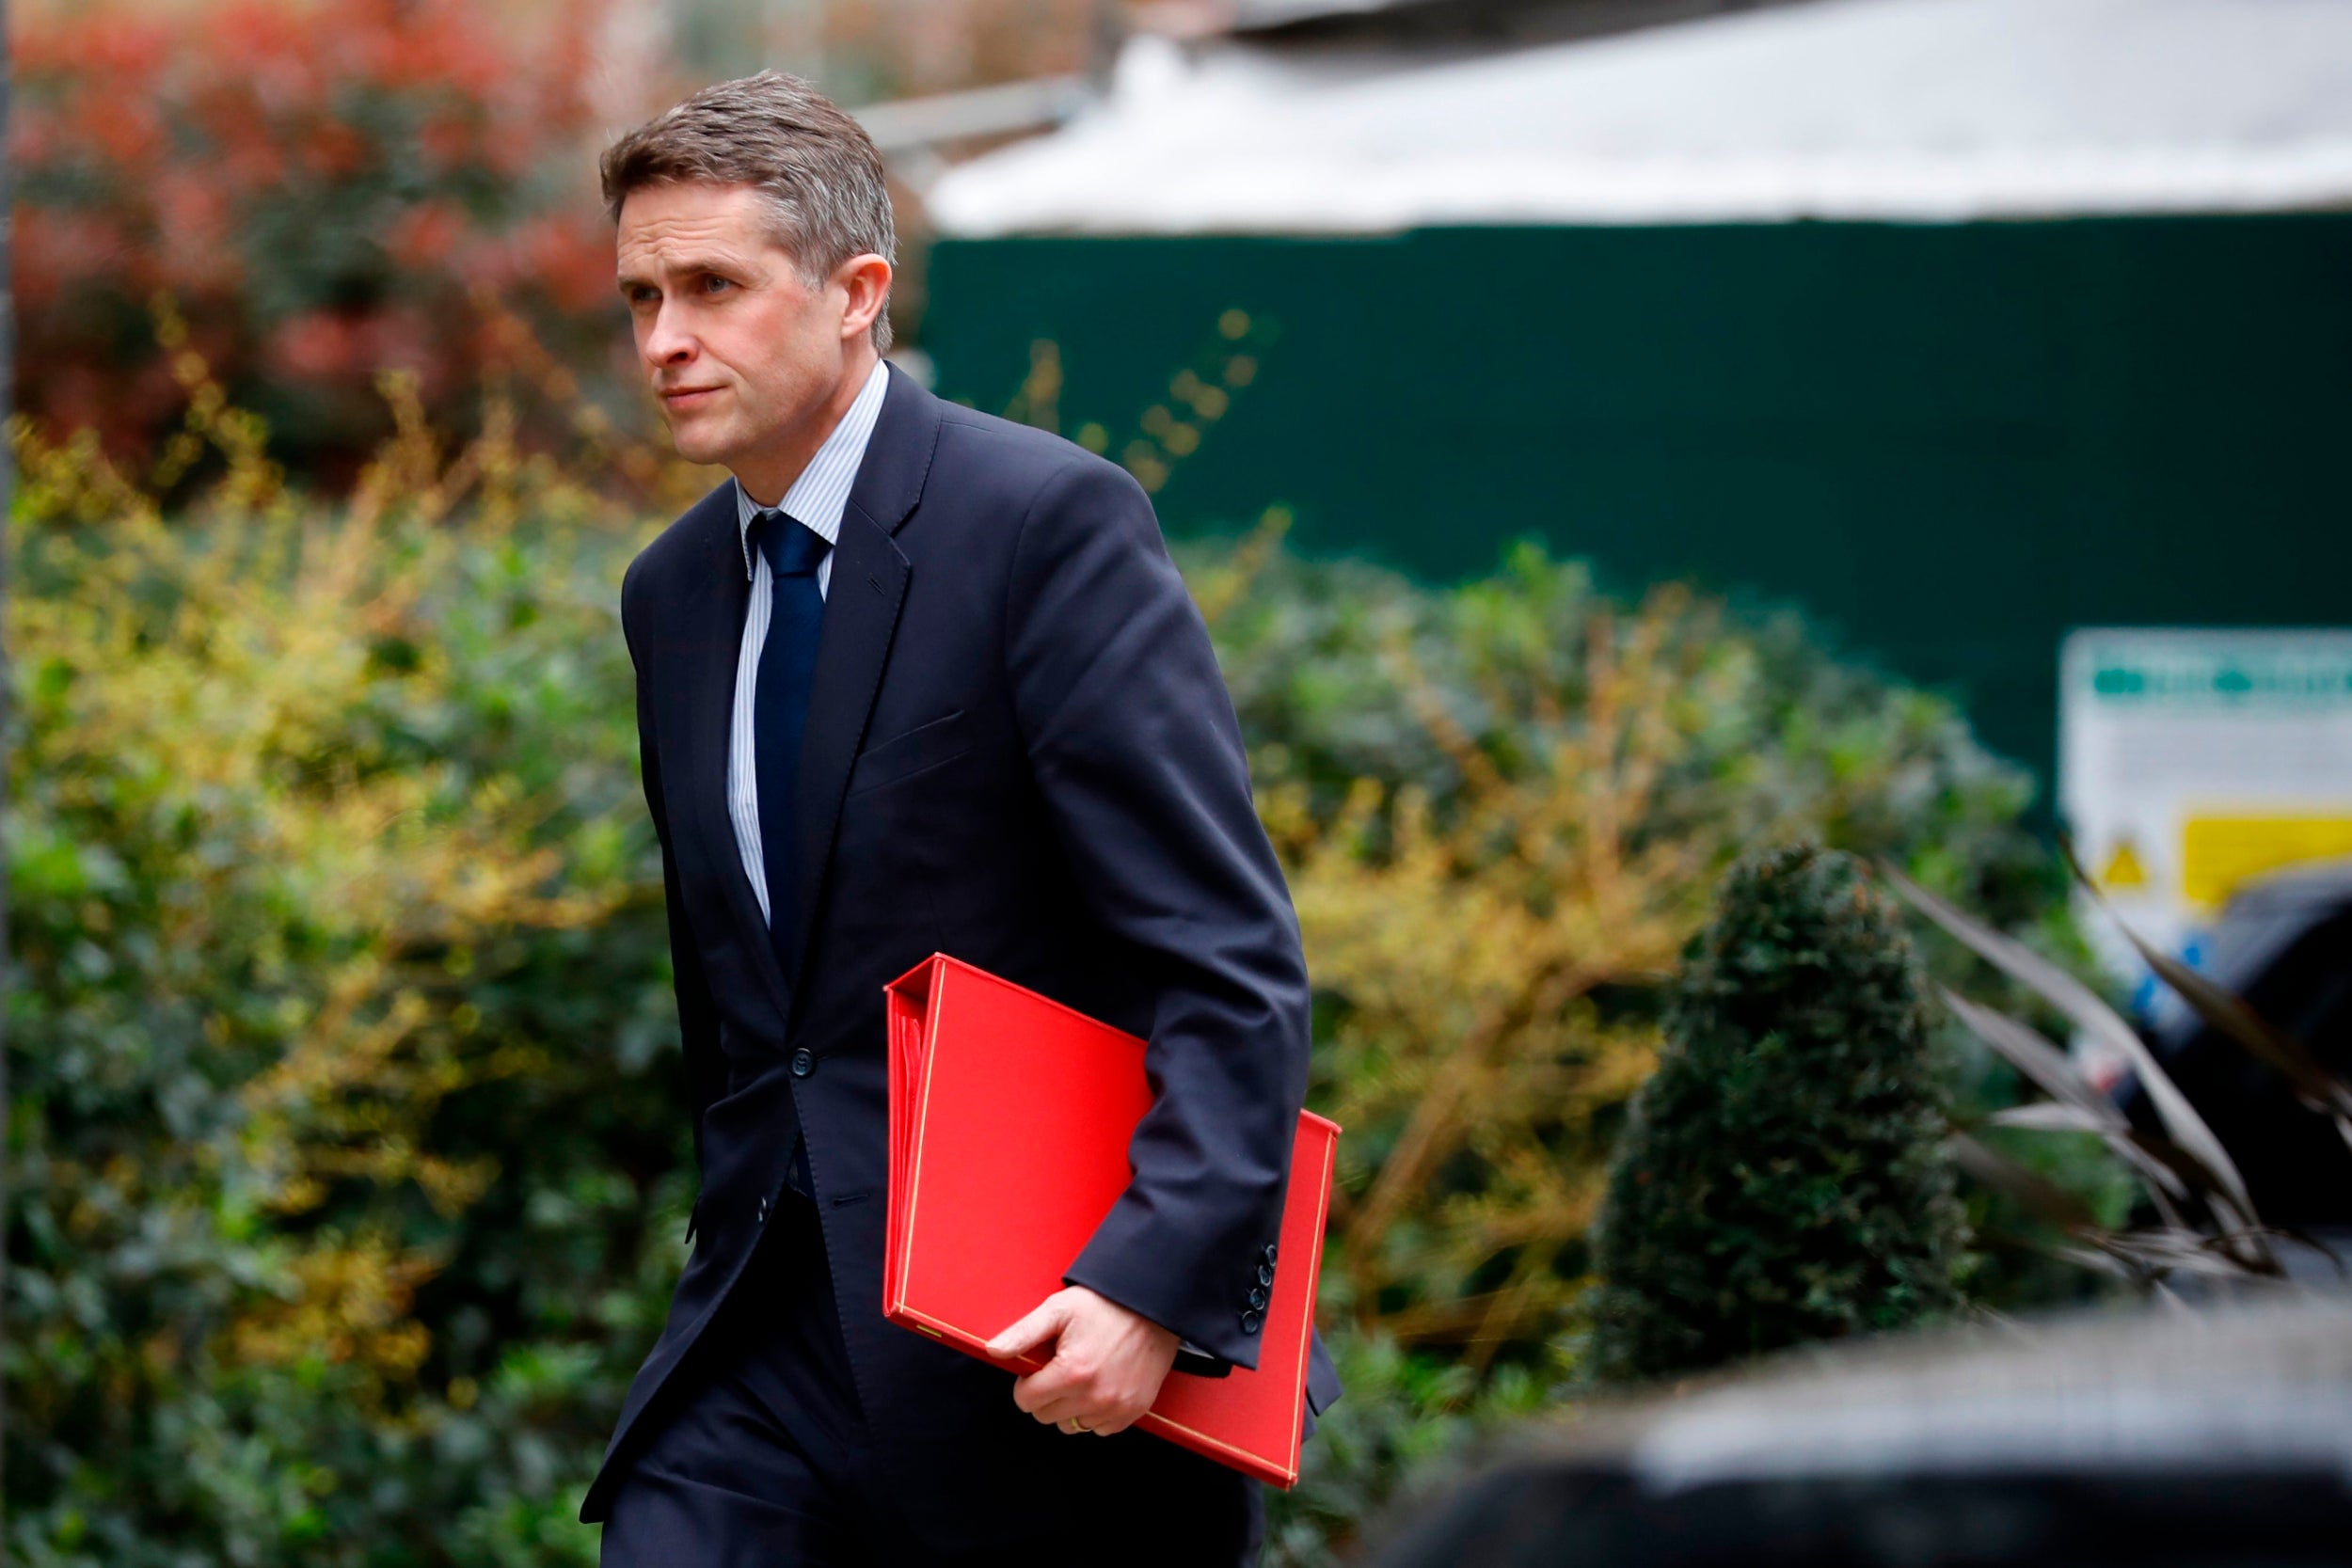 A-levels: Pressure grows on Gavin Williamson to U-turn on grading system, as government urged to consider GCSE results delay